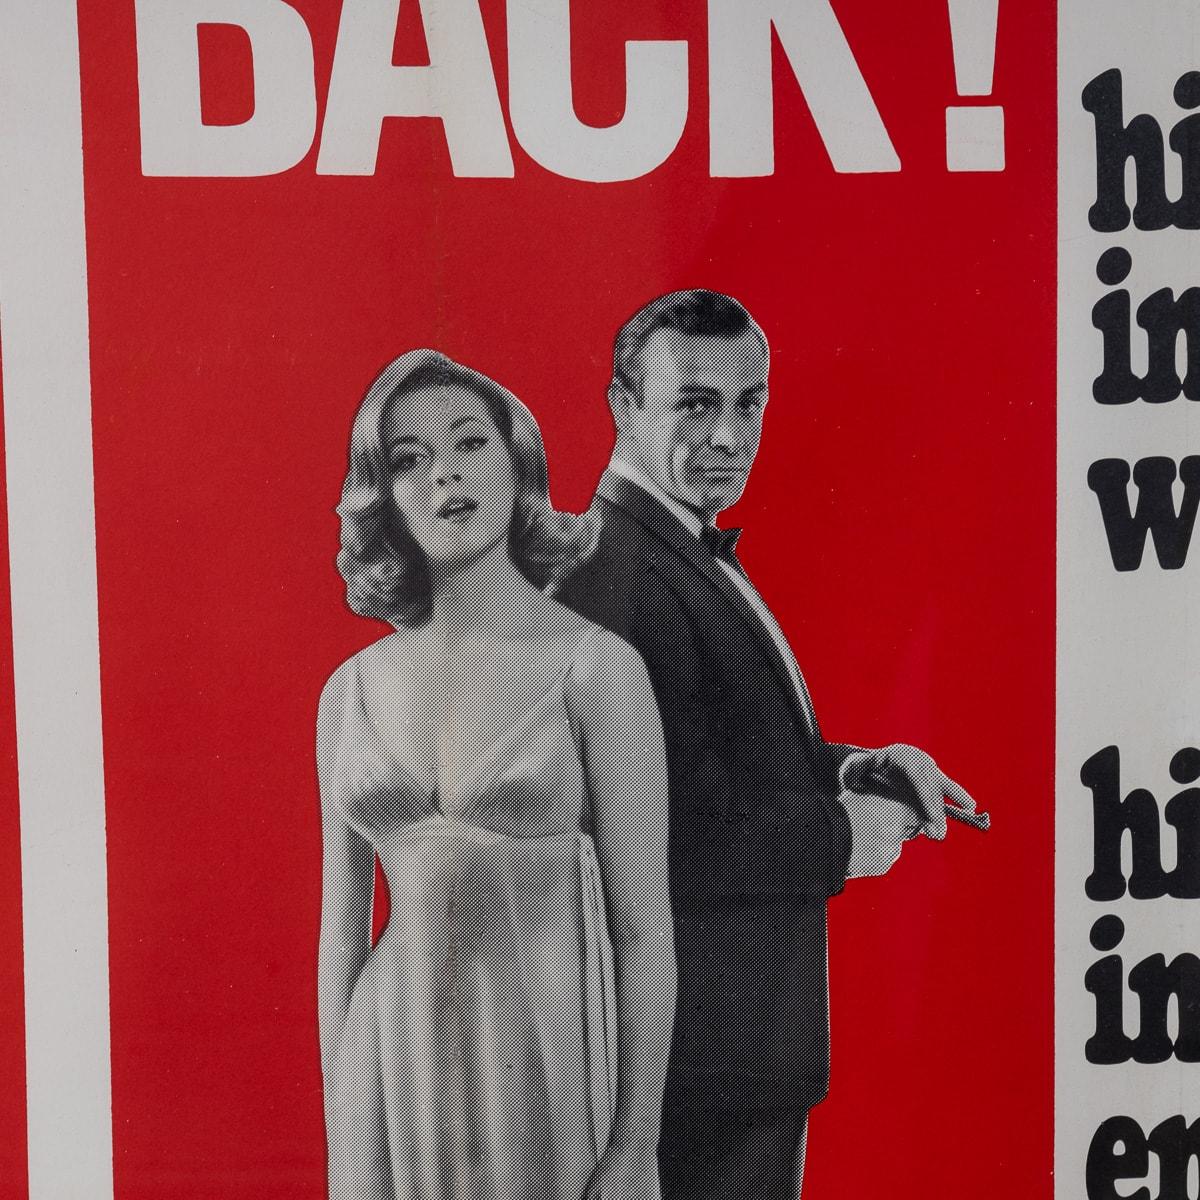 Original American (U.S) Release James Bond 'From Russia With Love' Poster c.1963 For Sale 7